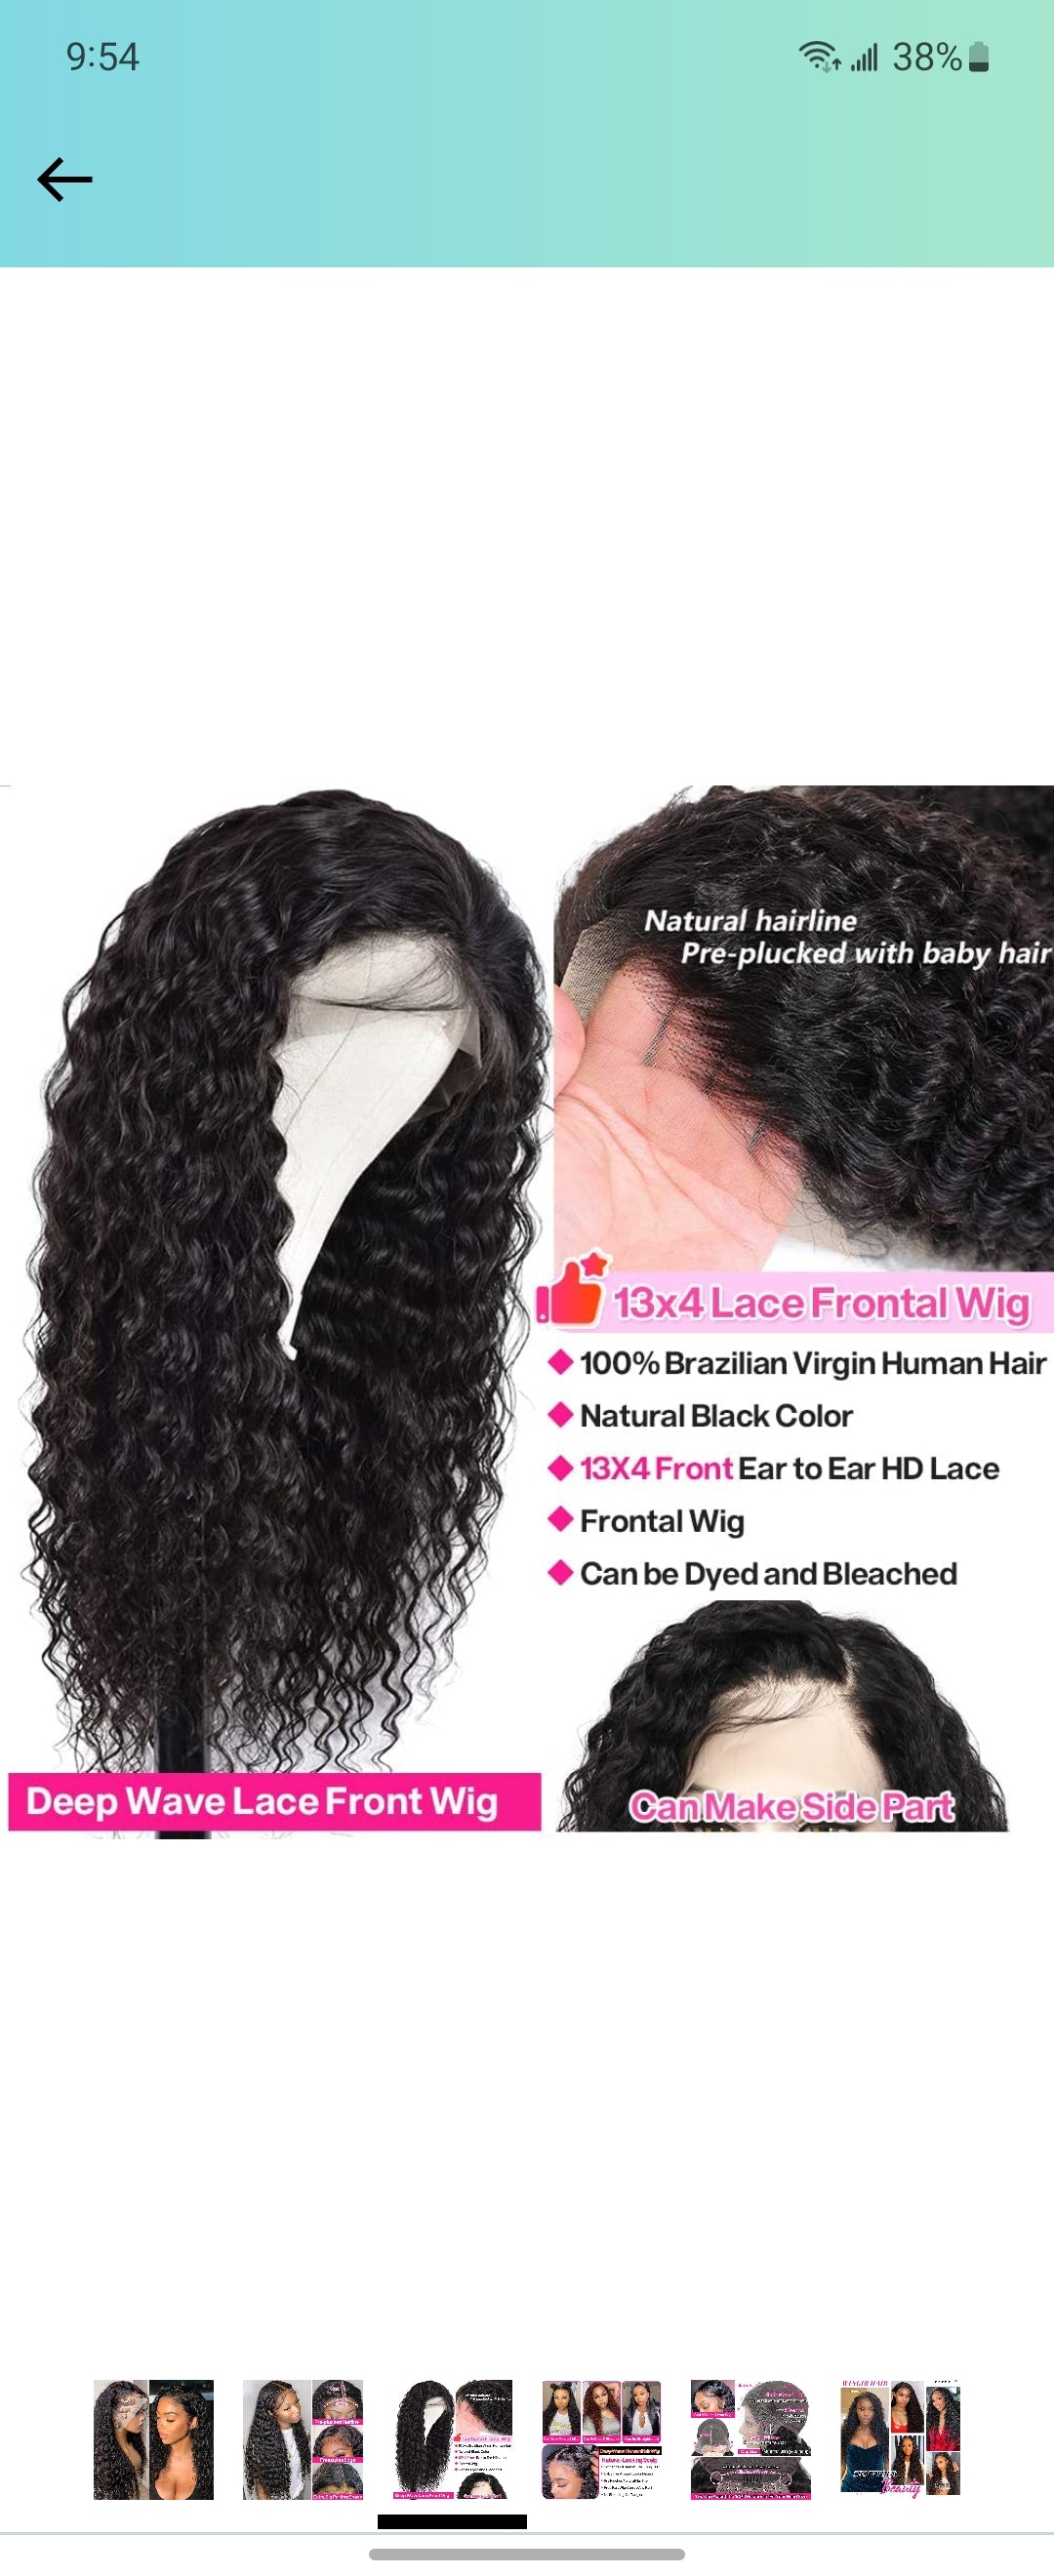 Deep Wave Lace front wig